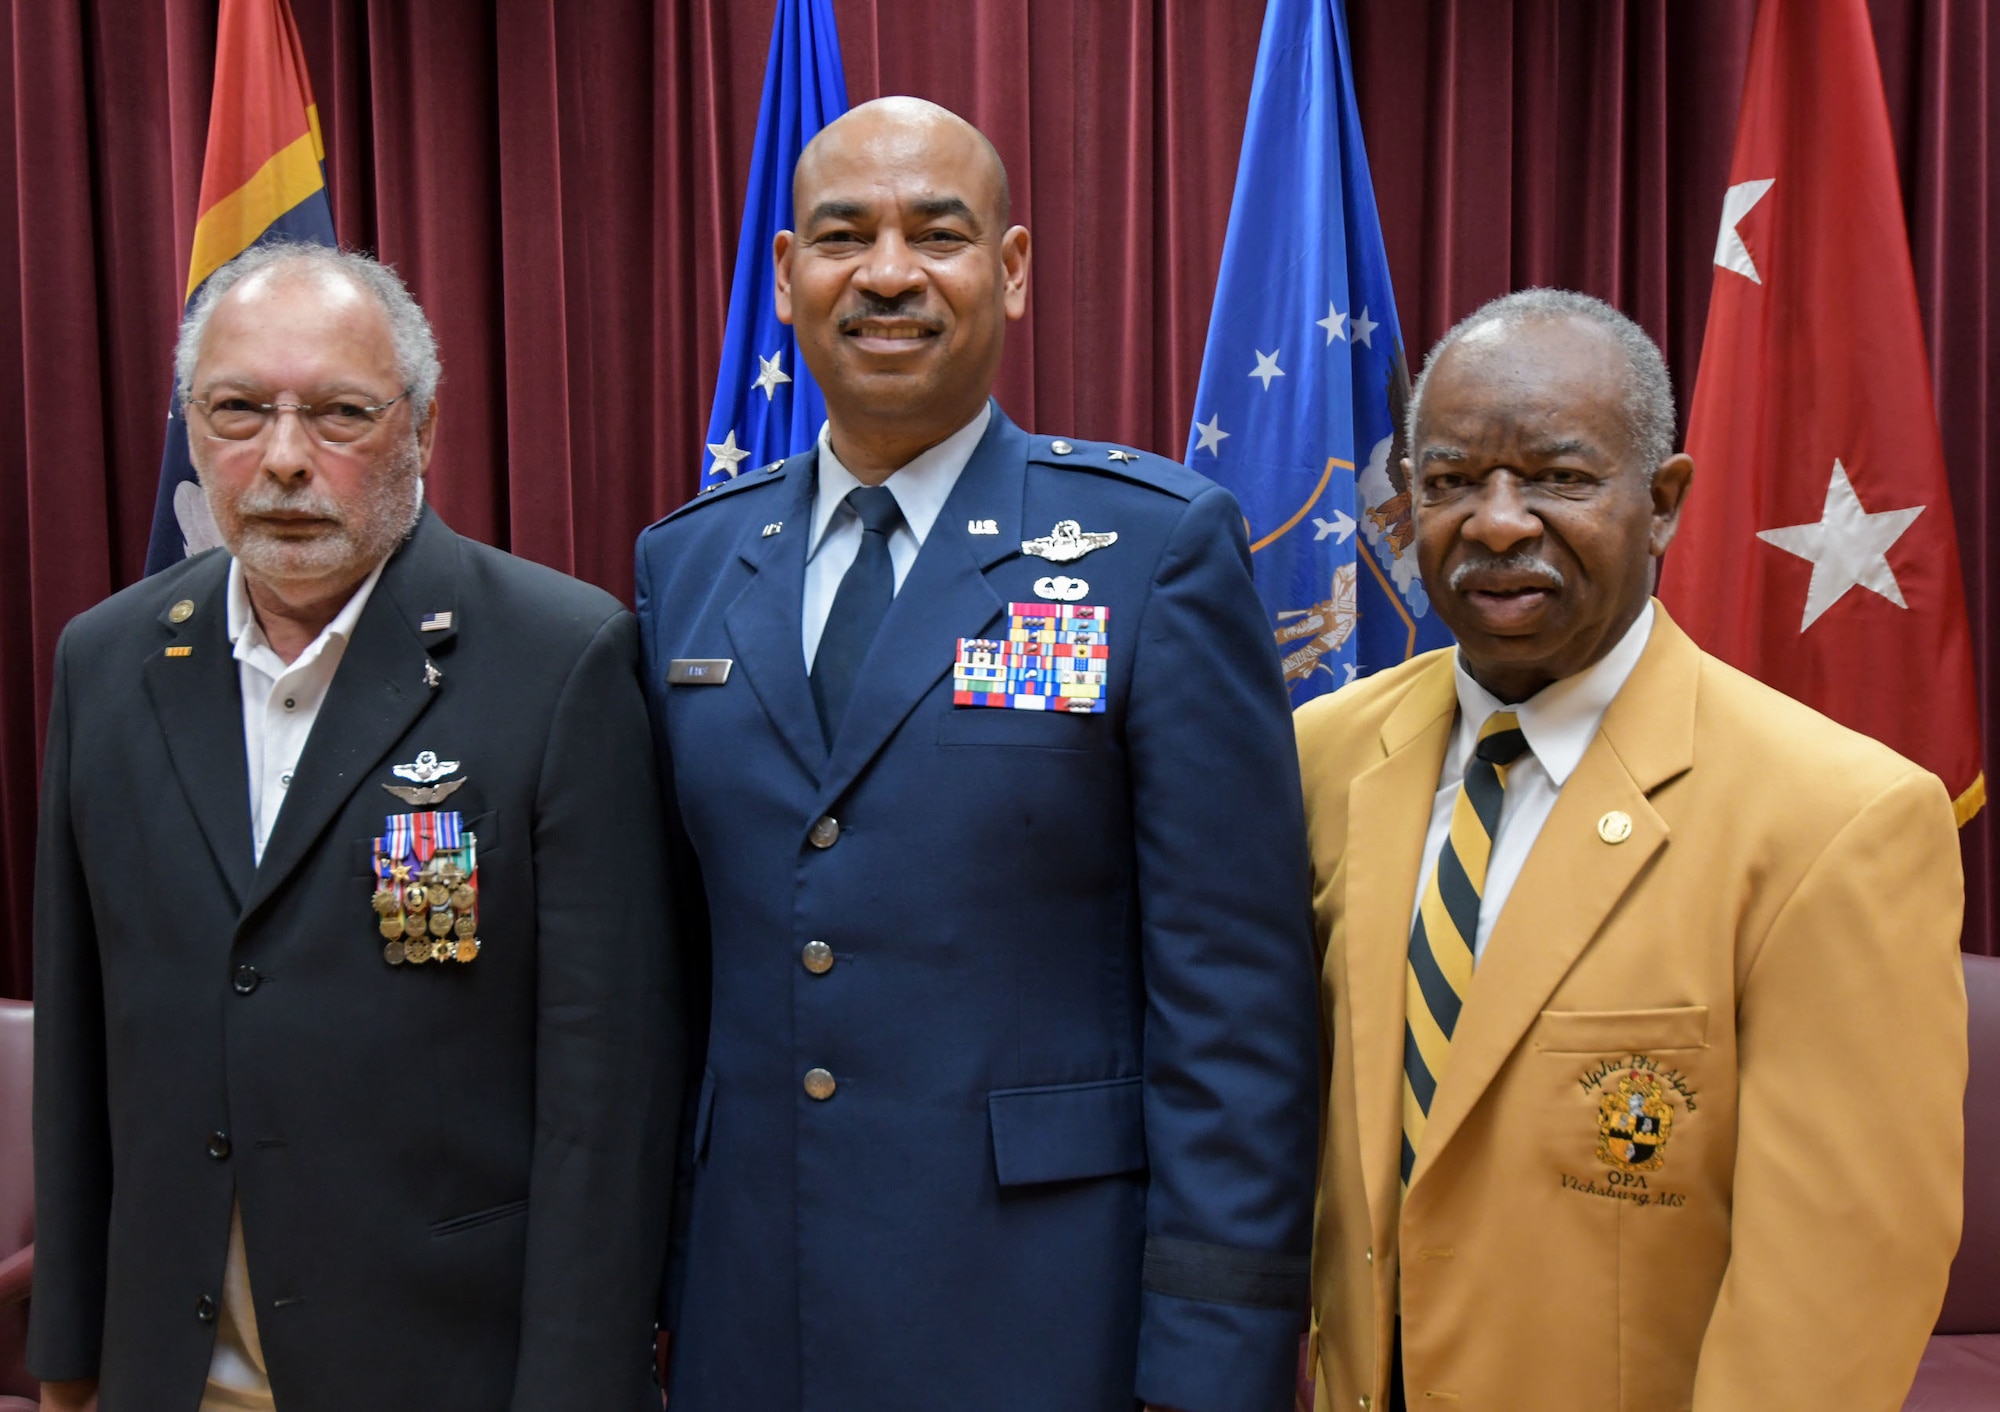 Brig. Gen. Edward H. Evans, Jr., chief of staff, Mississippi Air National Guard, shares a moment with Maj. (Ret.) Clarence “Clyde” Romero (left), the first African American Mississippi Air National Guard pilot for the 186th Air Refueling Wing, Meridian, Mississippi, and Capt. (Ret.) Brady Tonth, Jr (right), the first African American Mississippi Air National Guard pilot for the 172nd Airlift Wing, Jackson, Mississippi, following his promotion ceremony at Mississippi National Guard Joint Force Headquarters, Jackson, Mississippi, March 5, 2022.